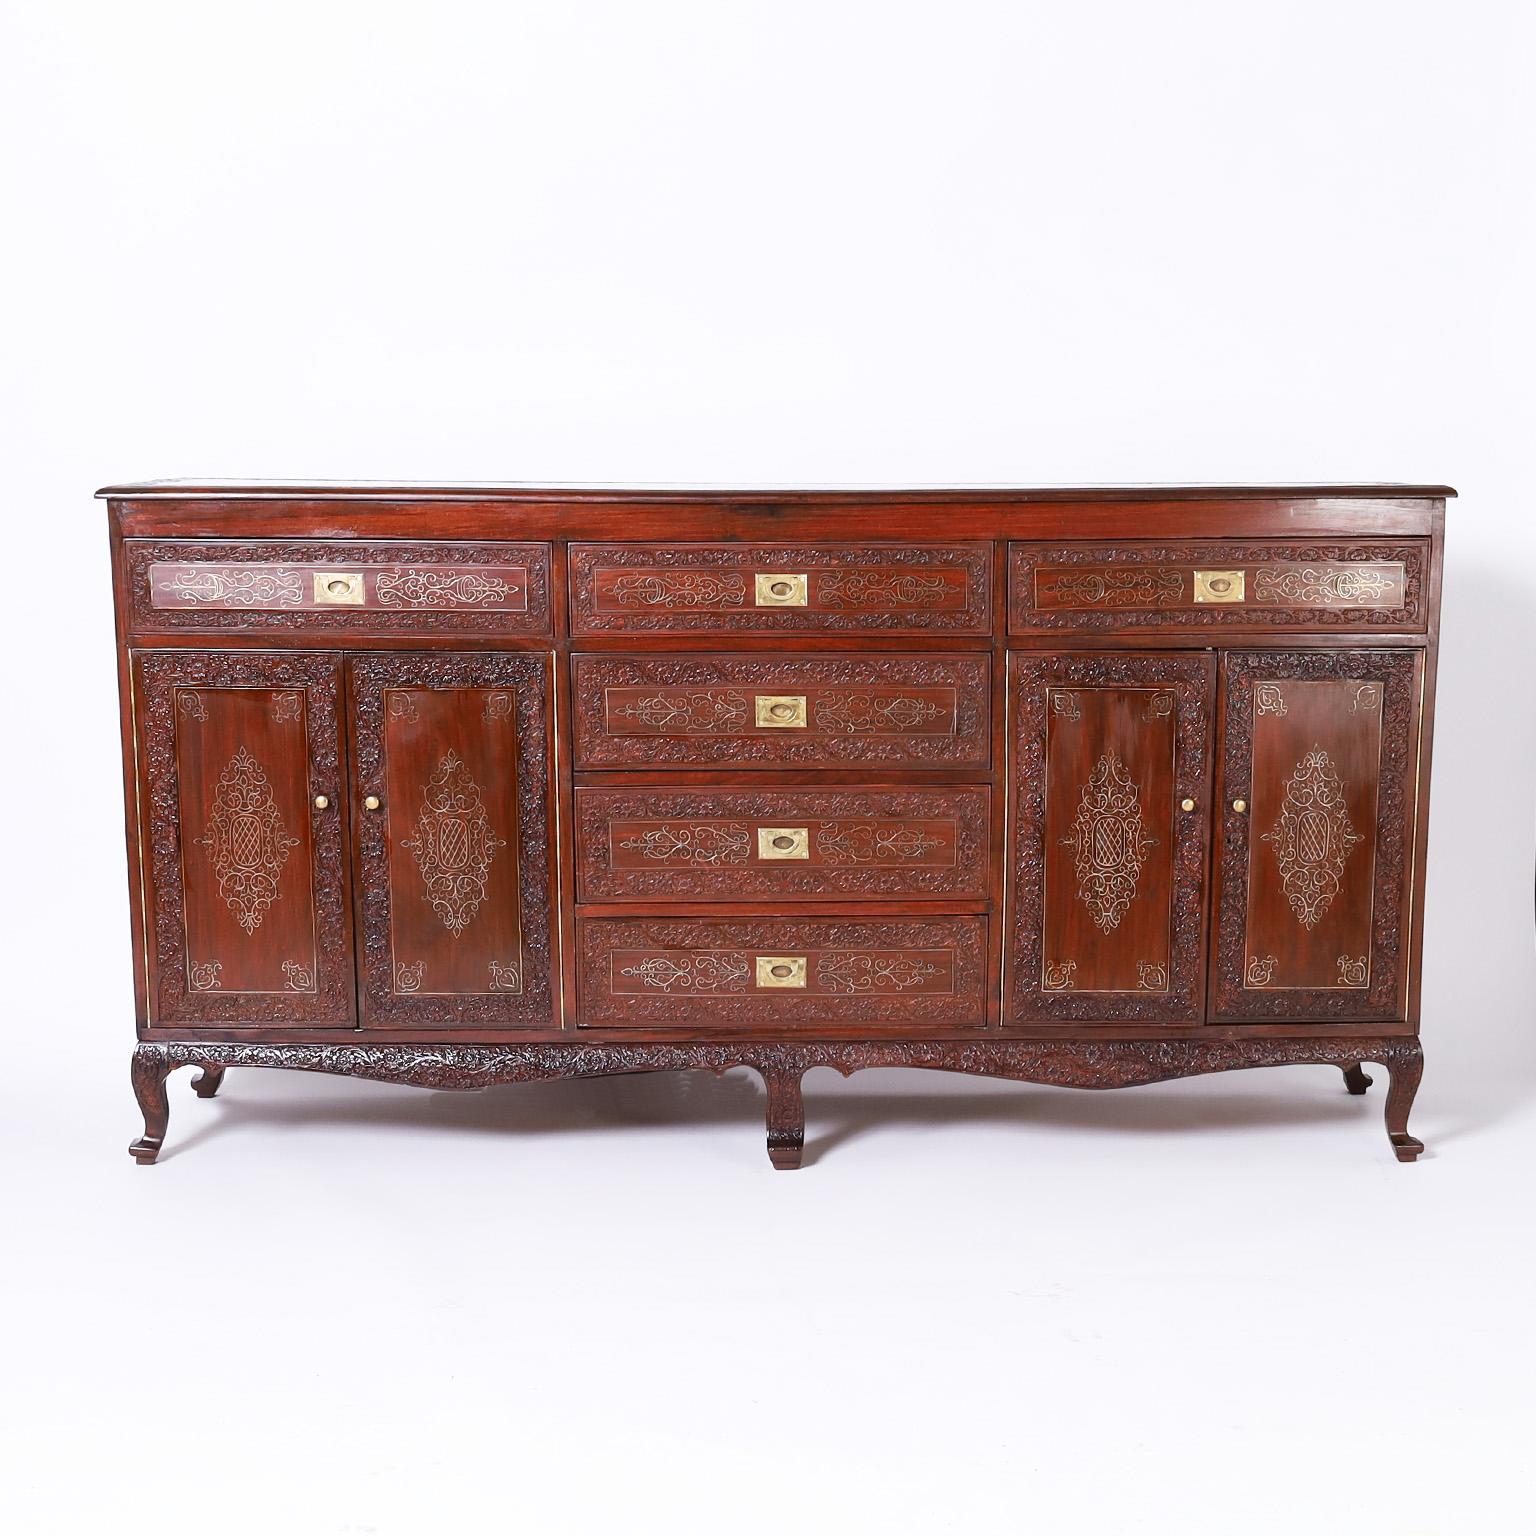 Opulent antique Anglo Indian sideboard or chest with six drawers and four doors crafted in grand scale with well grained rosewood with all the frill and frippery. Featuring ambitious floral carvings throughout, delicate floral brass string inlays on